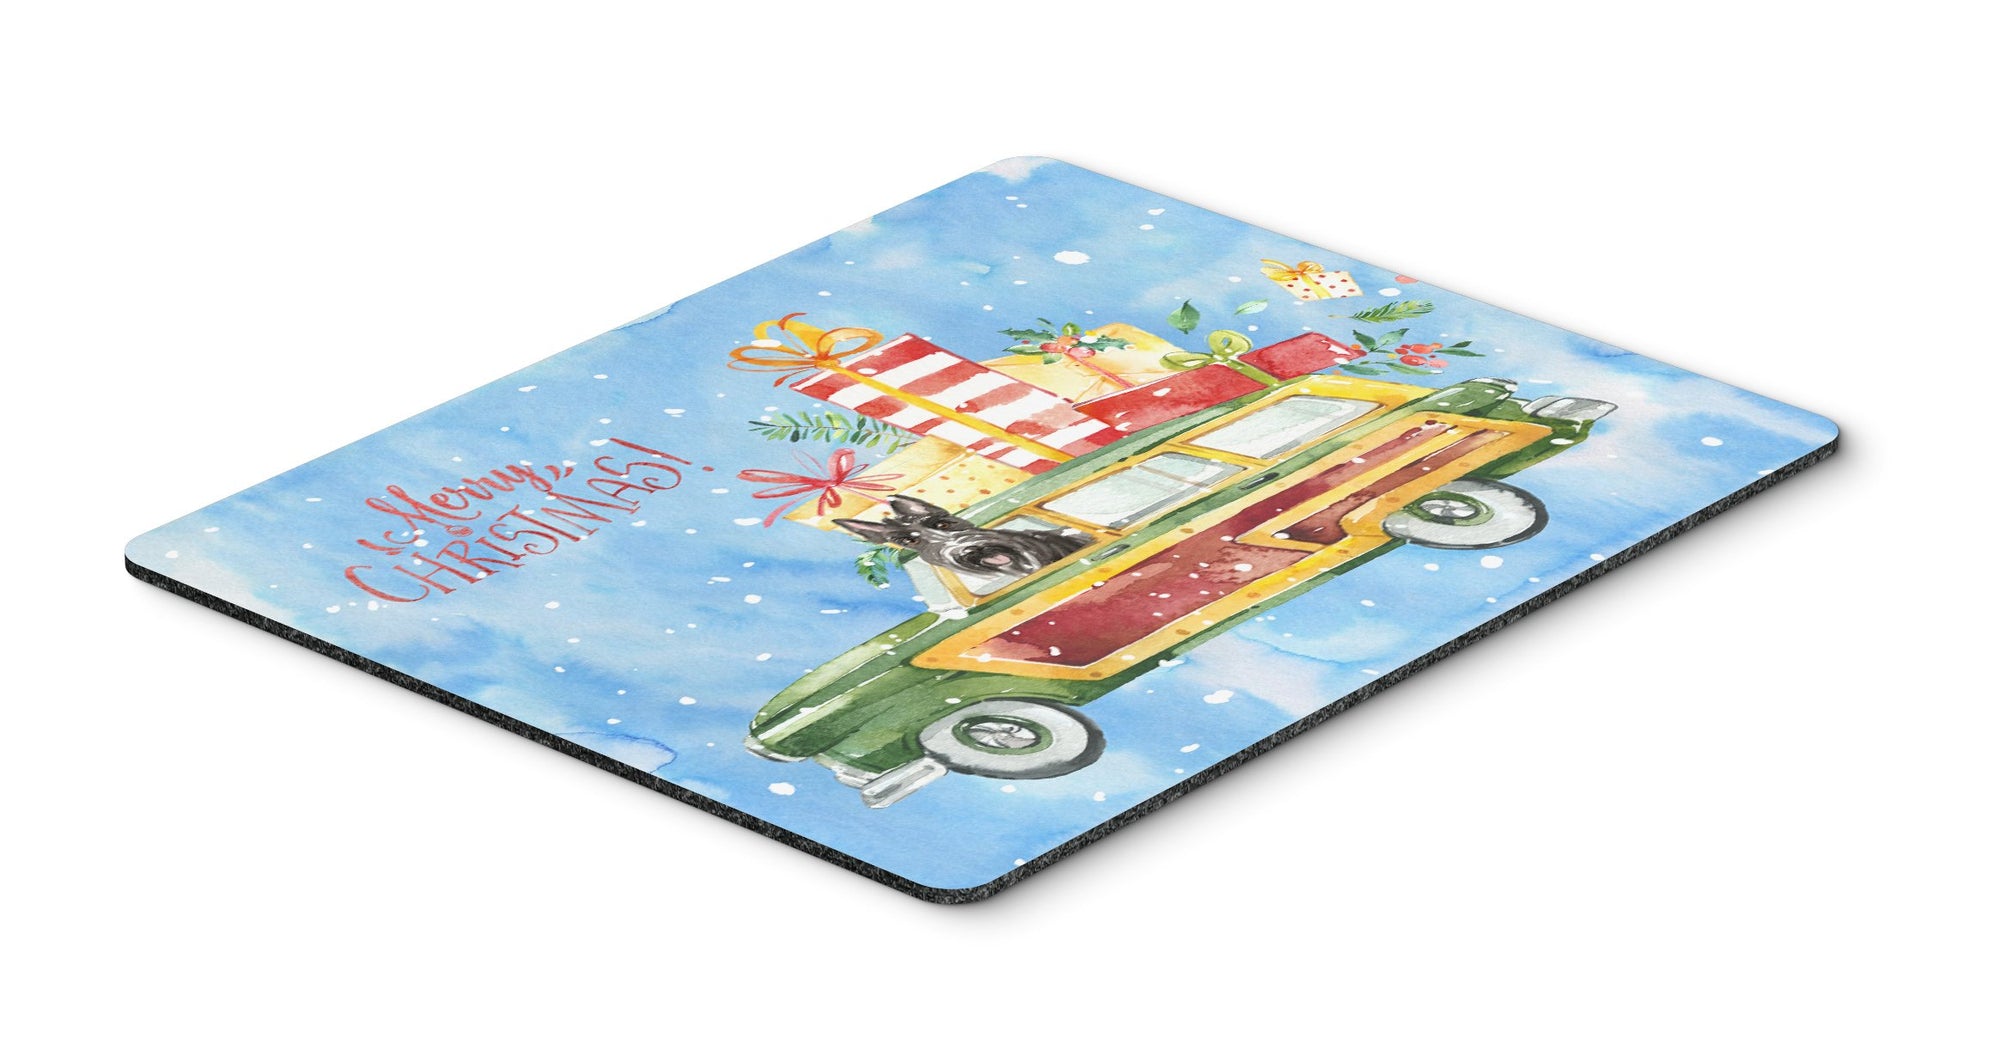 Merry Christmas Scottish Terrier Mouse Pad, Hot Pad or Trivet CK2420MP by Caroline's Treasures